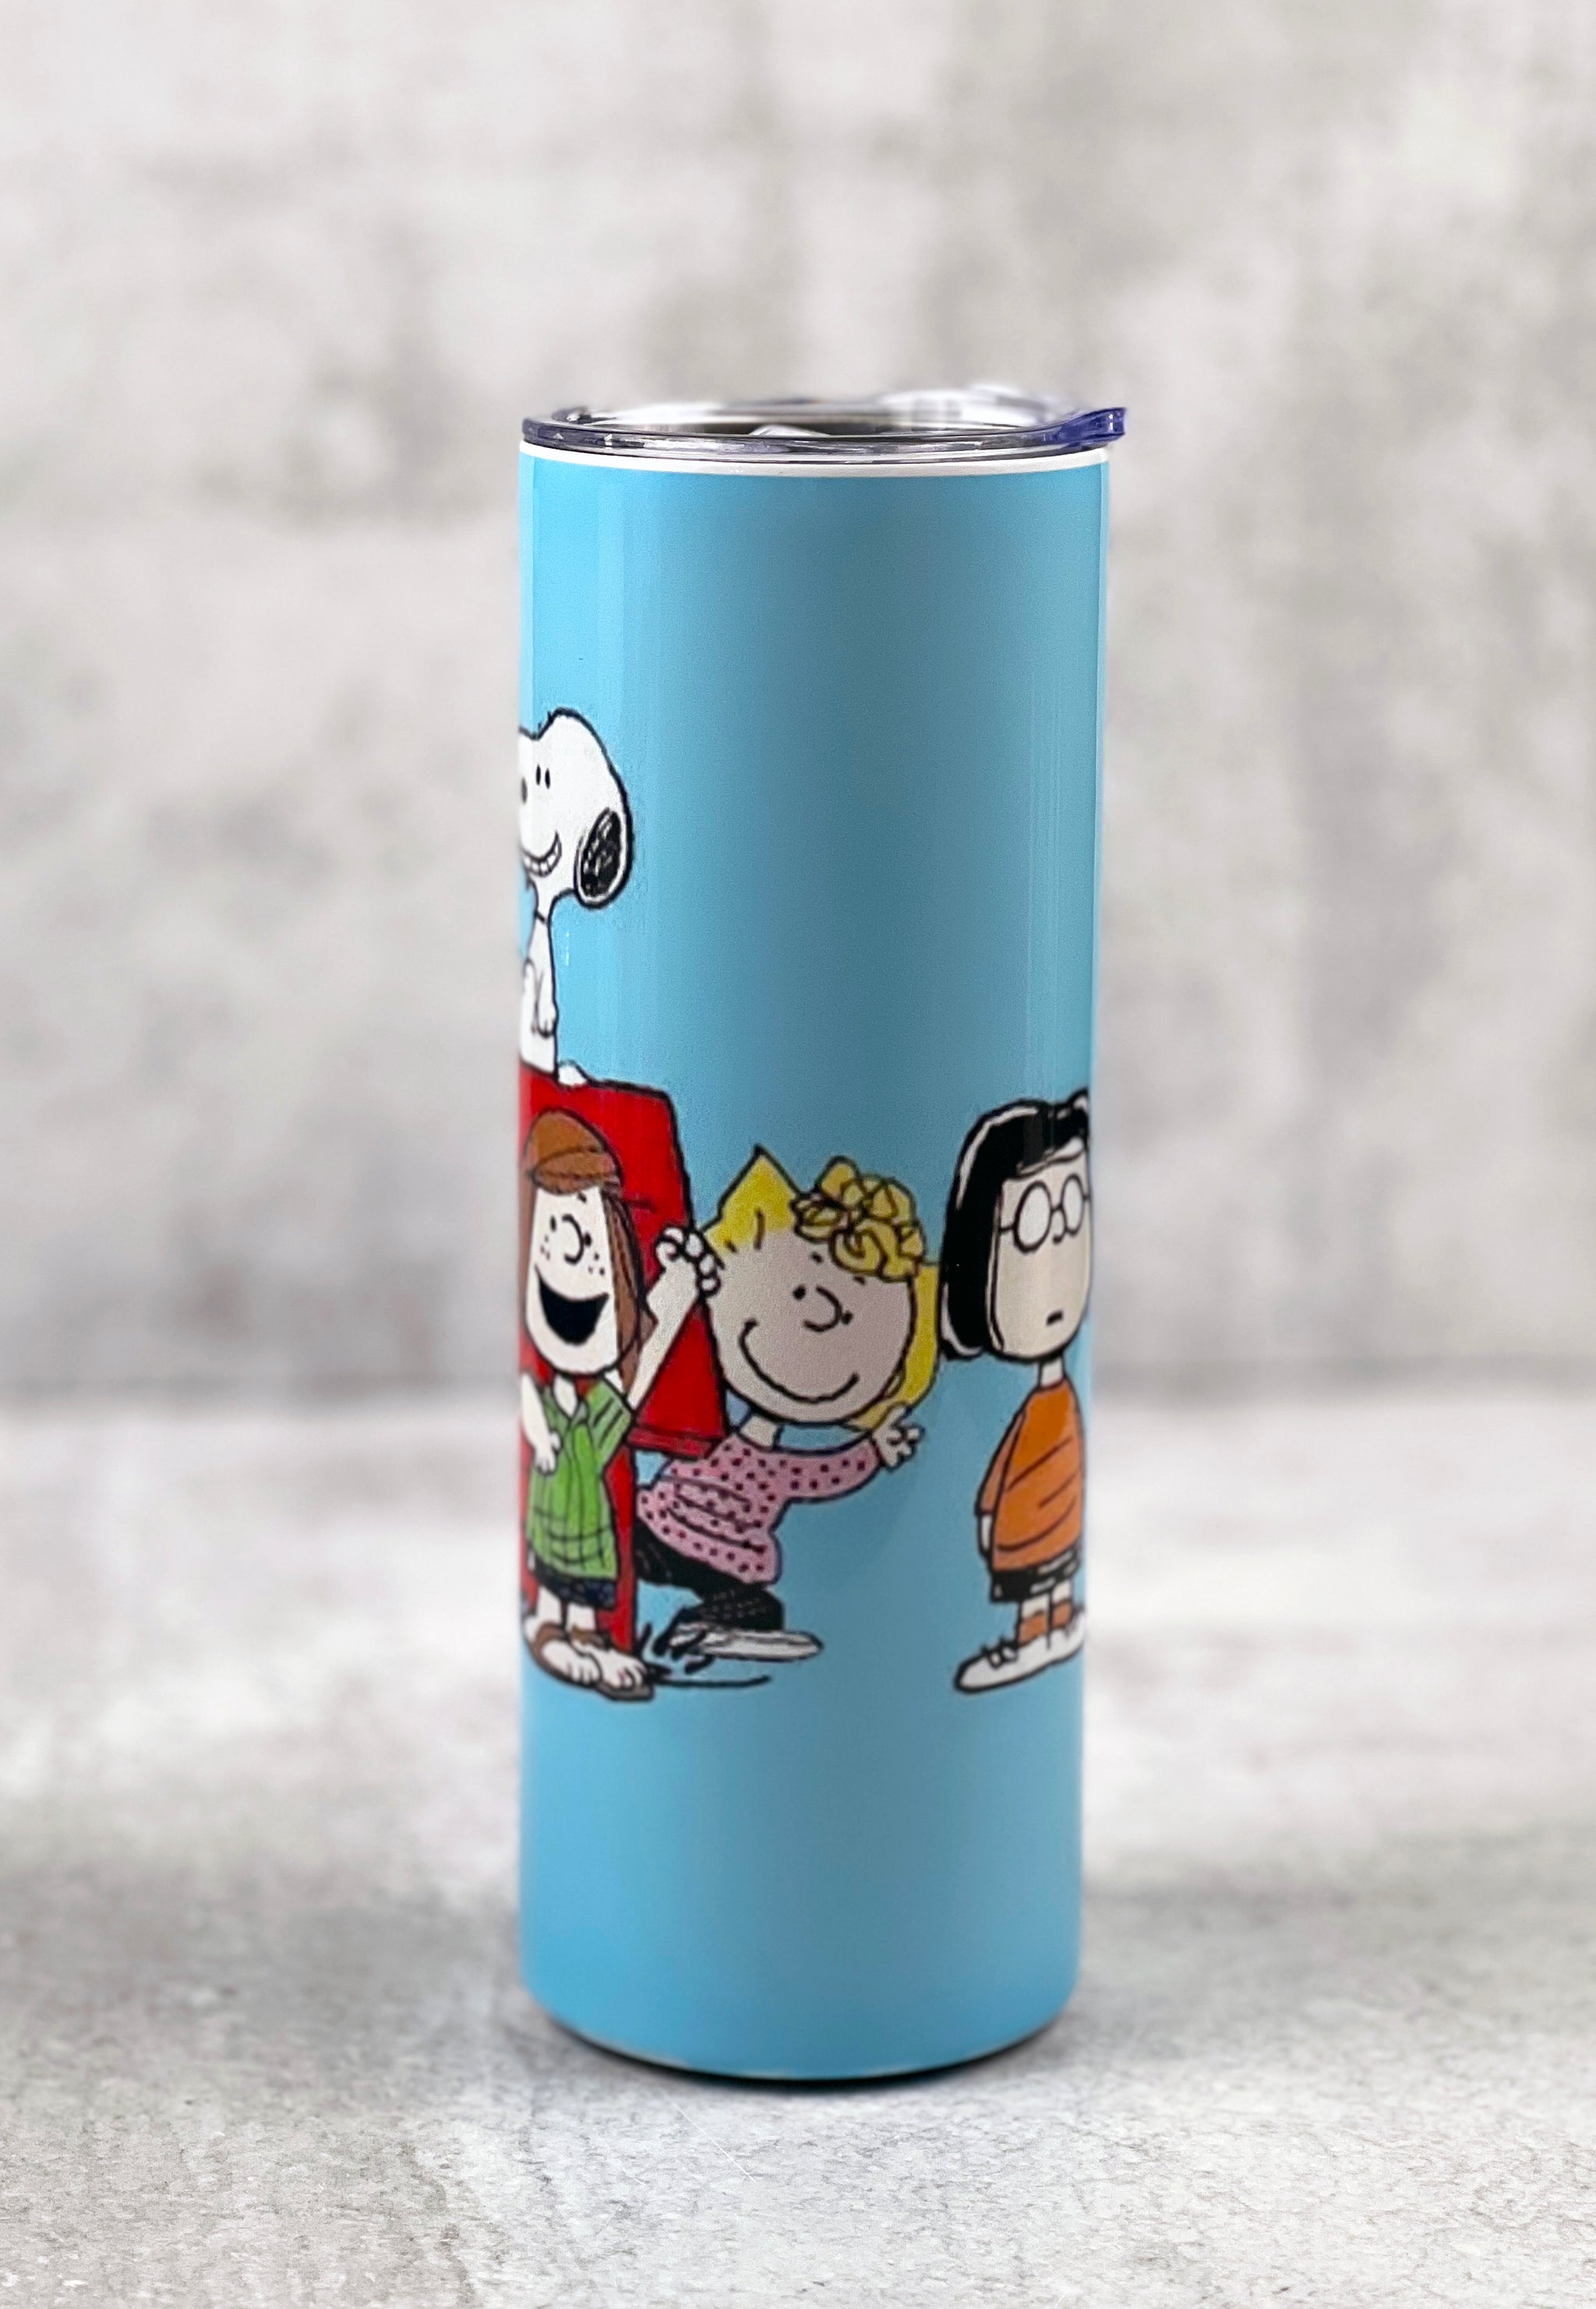 Snoopy Tumbler Hot and Cold Drink/Peanut Tumbler